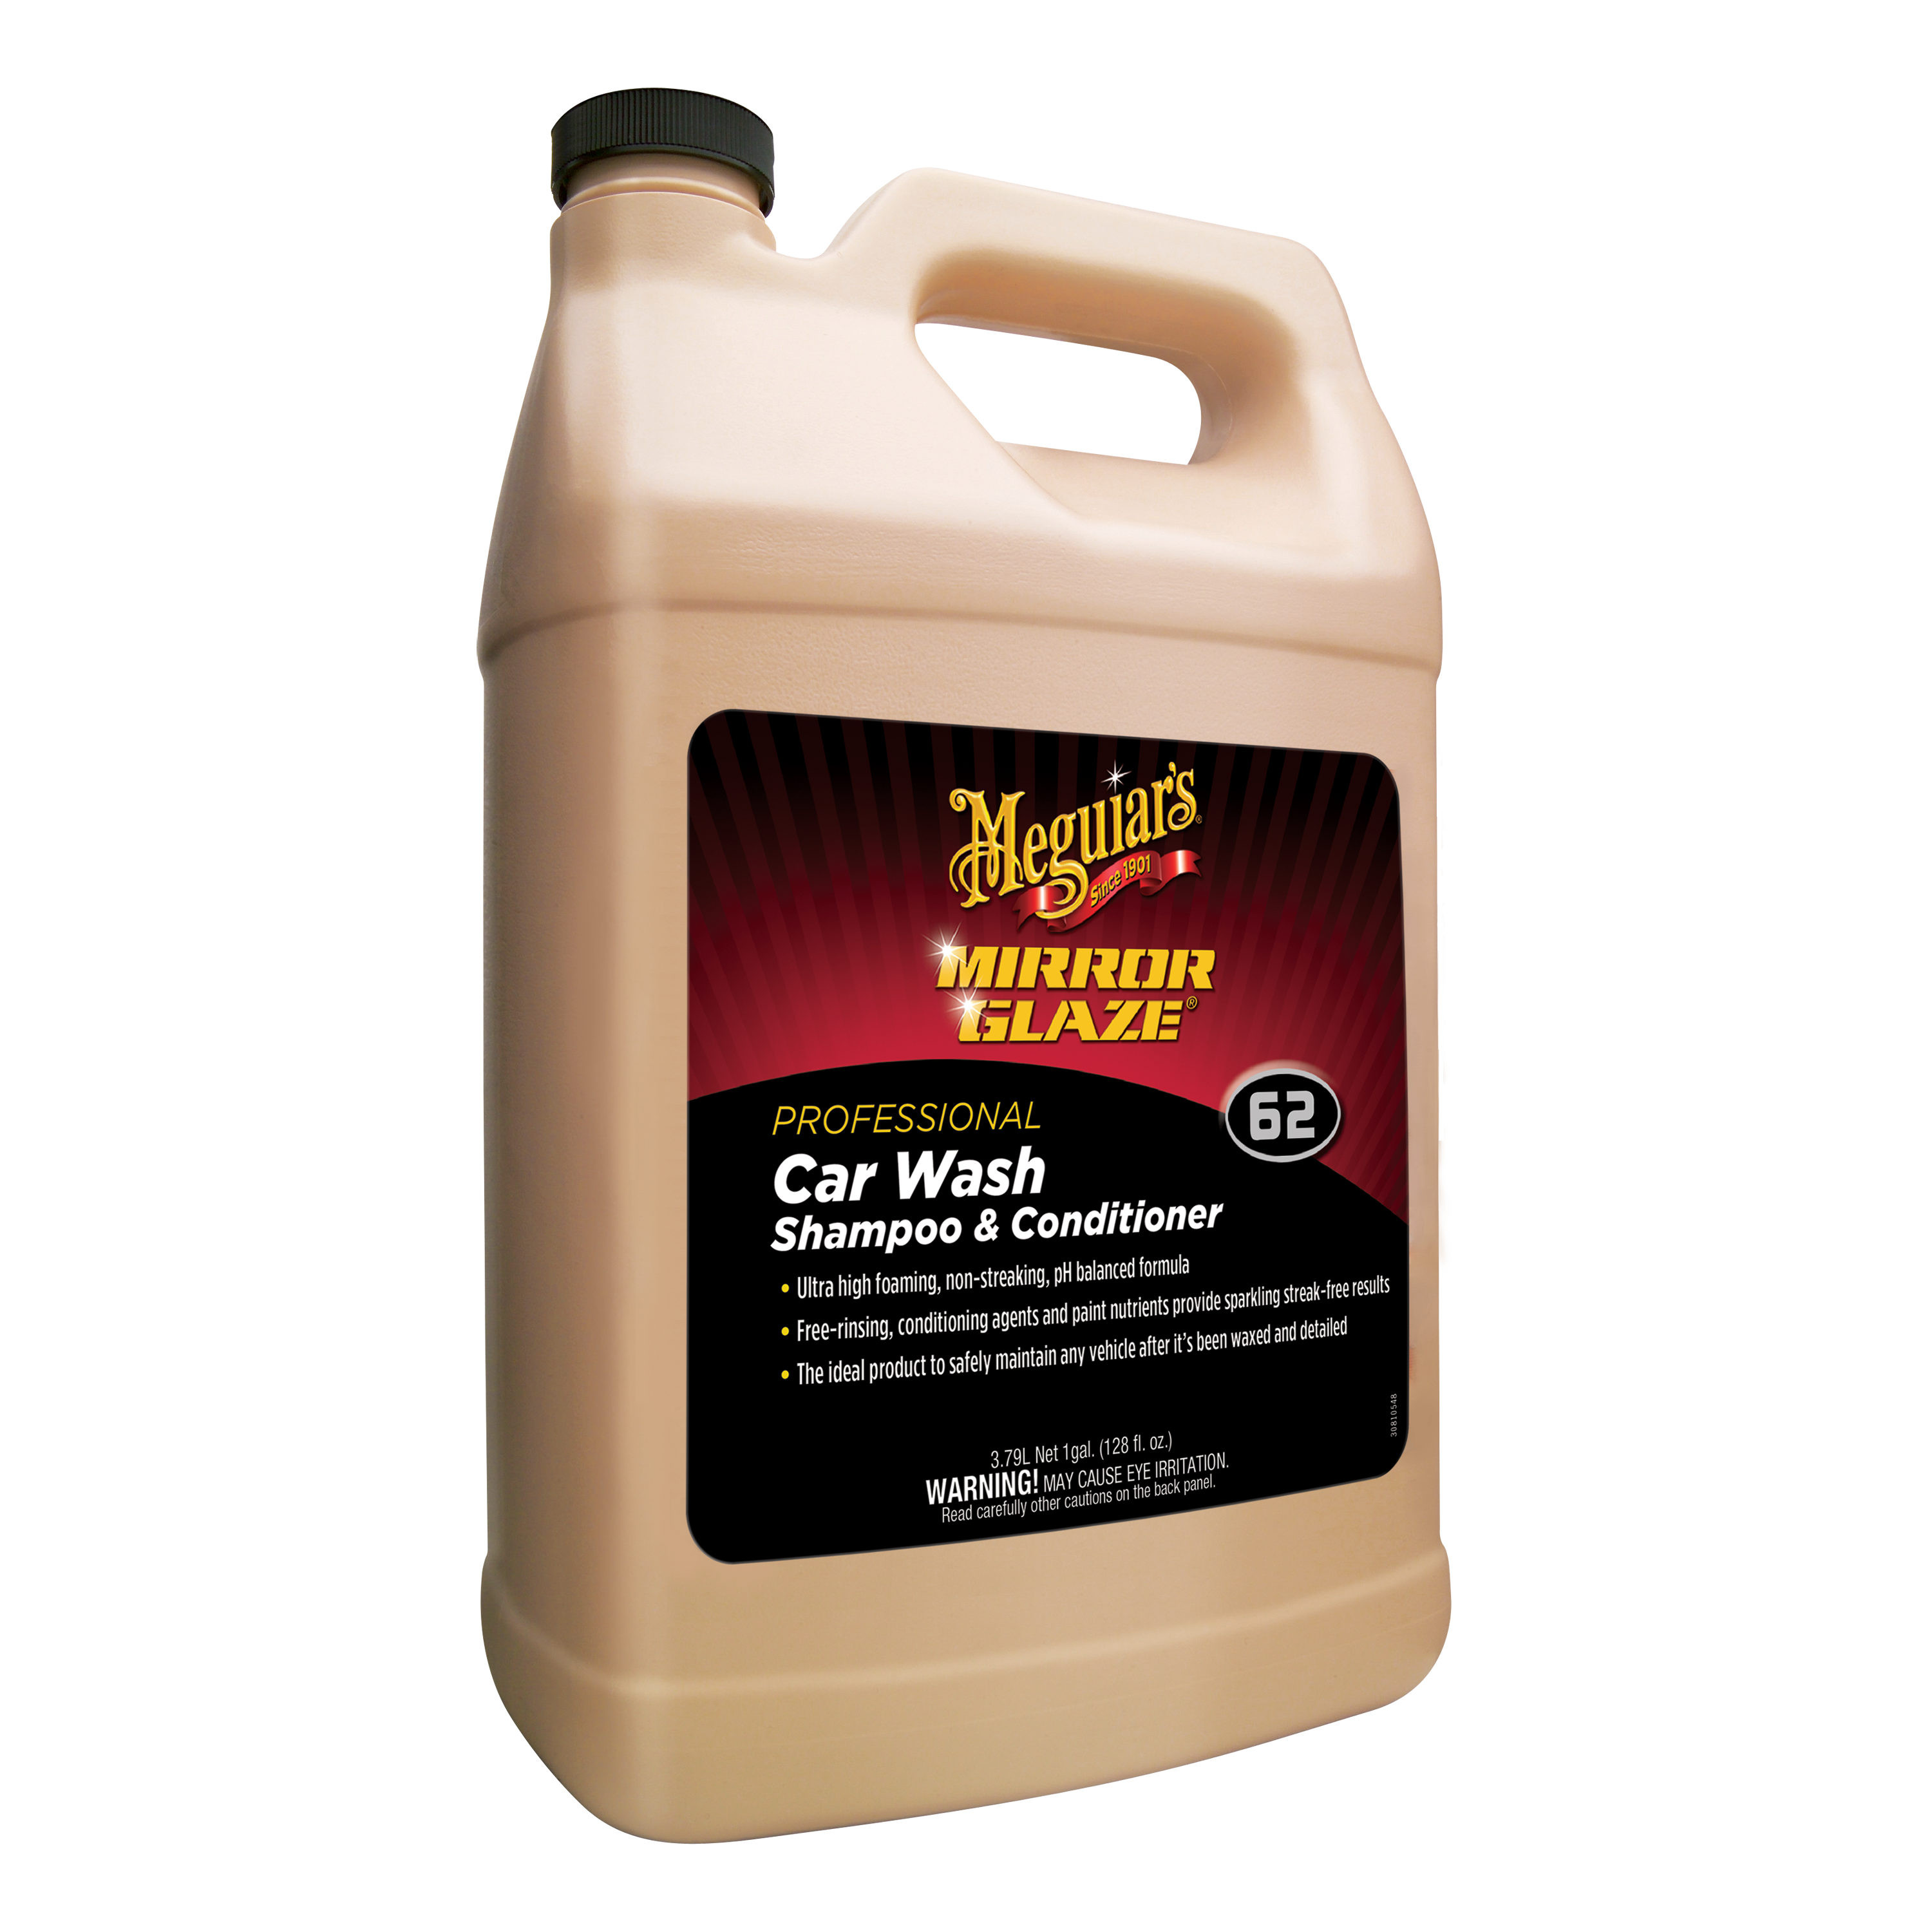 WINDOW TINT GLUE REMOVER - YEAGER'S DETAILING SUPPLIESYeager's